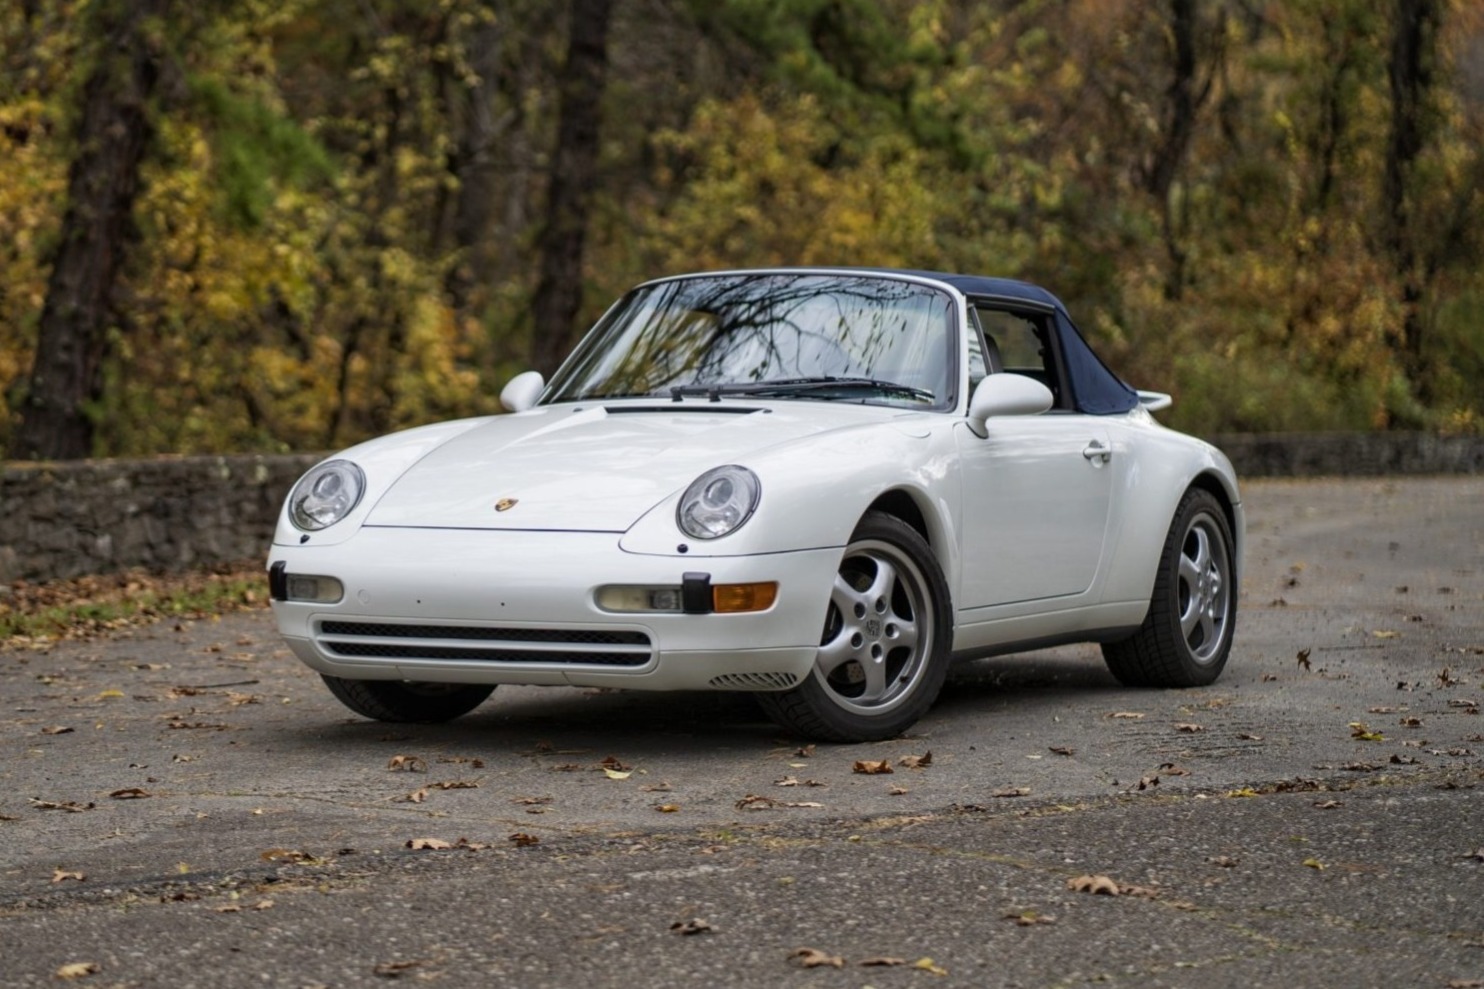 Used 32k-Mile 1996 Porsche 911 Carrera Cabriolet 6-Speed Review